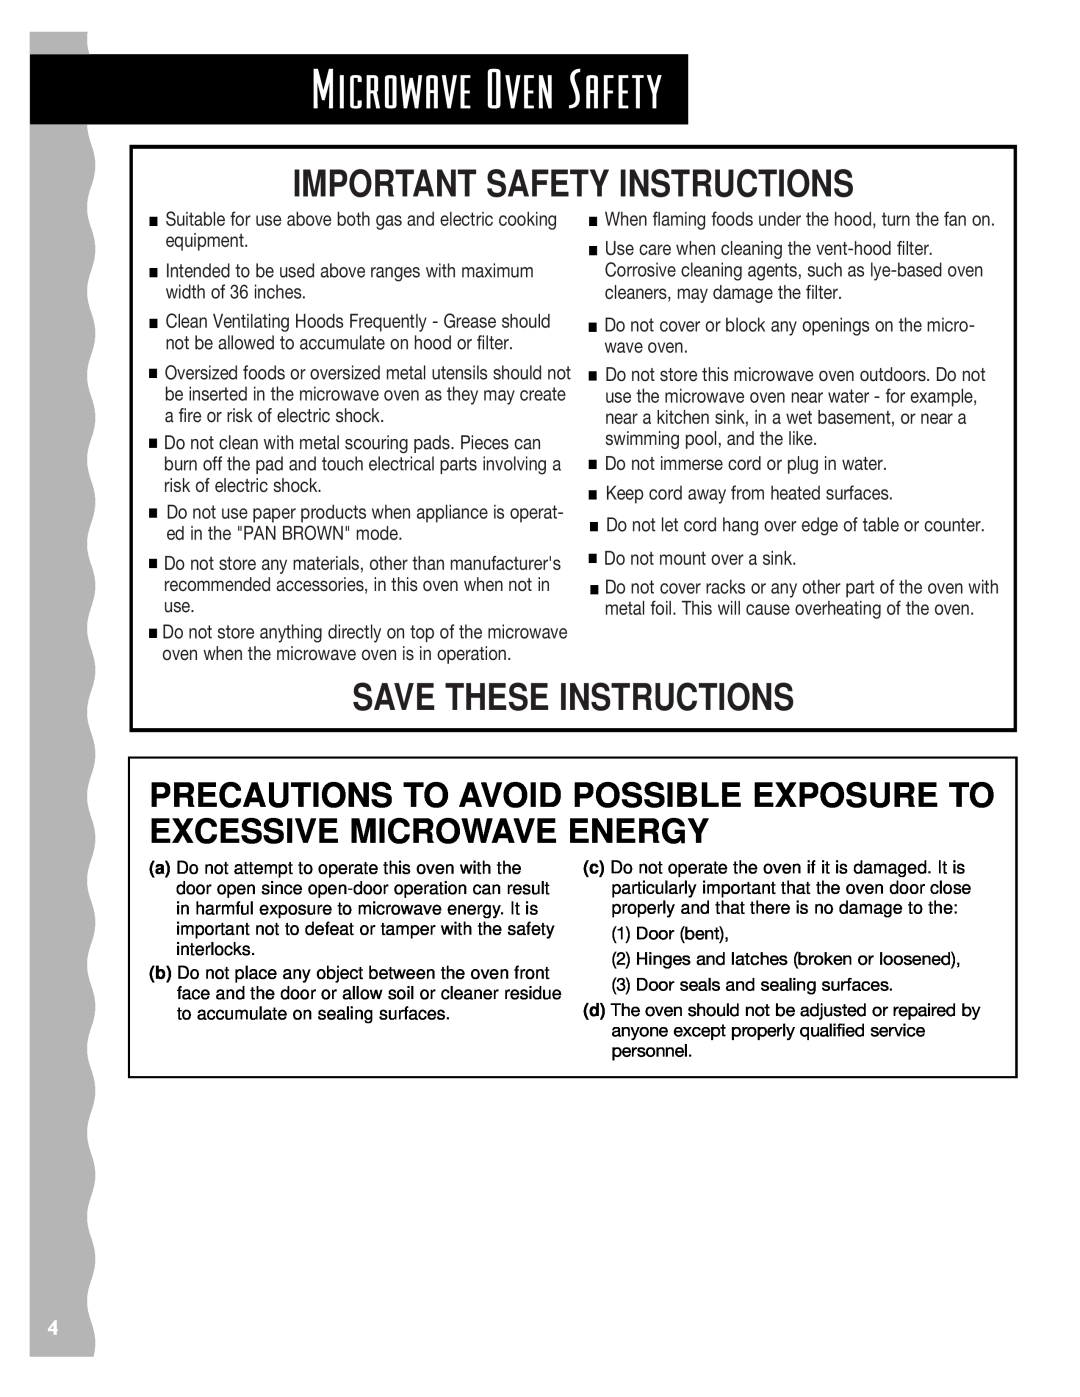 KitchenAid KHMS145J warranty Precautions To Avoid Possible Exposure To Excessive Microwave Energy, Microwave Oven Safety 